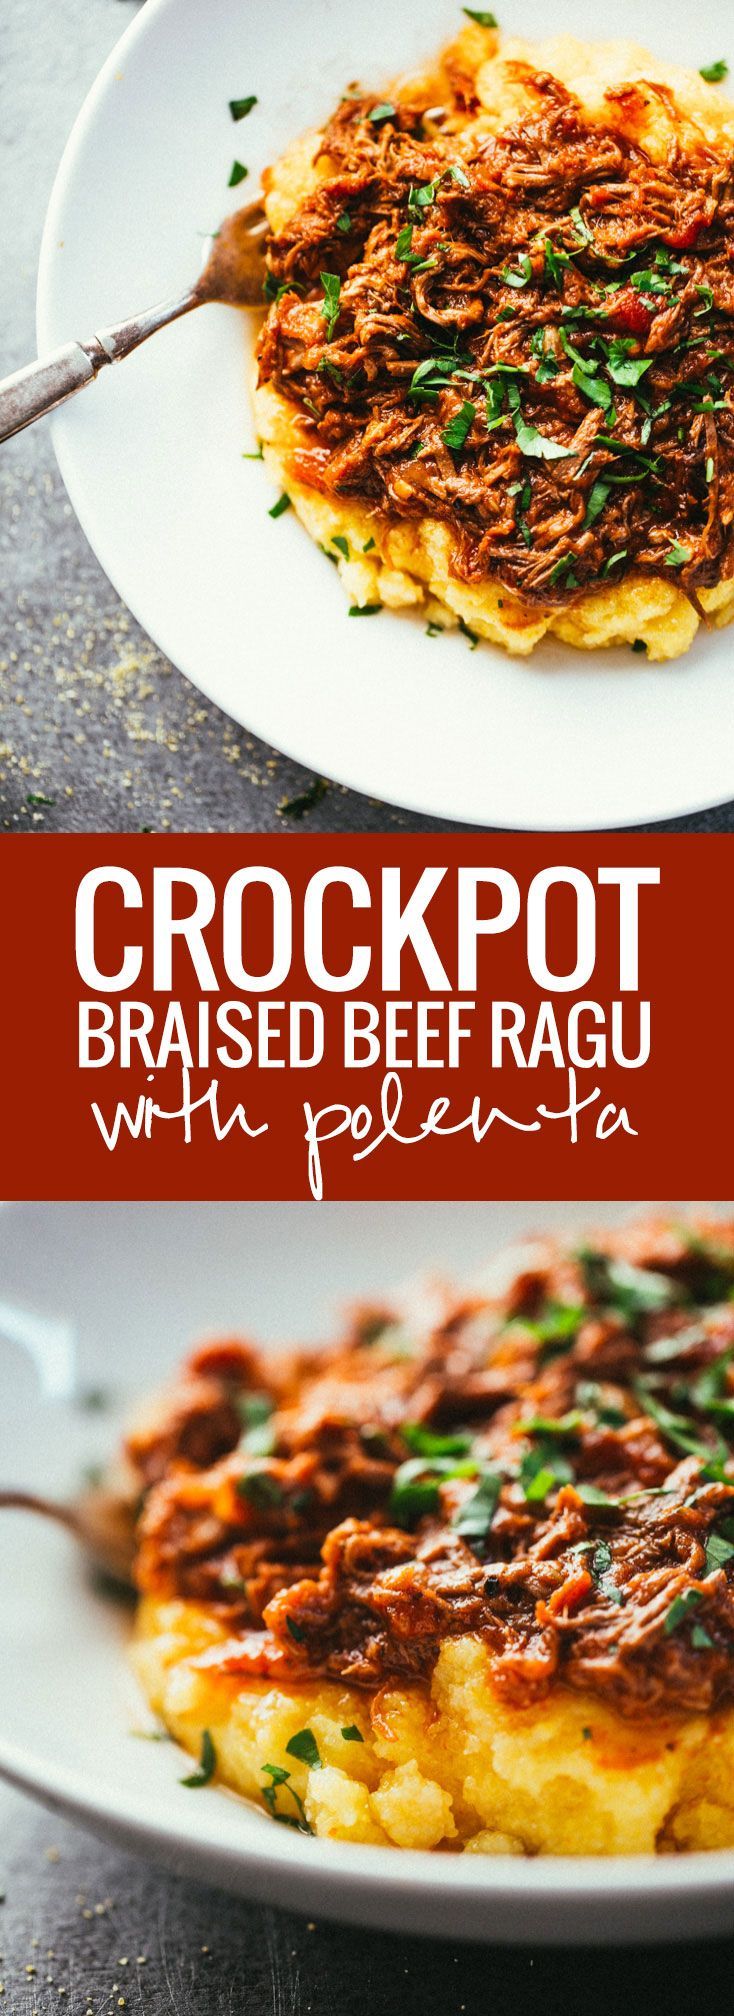 Crockpot Braised Beef Ragu with Polenta – Super easy to make and perfect for winter weeknights!